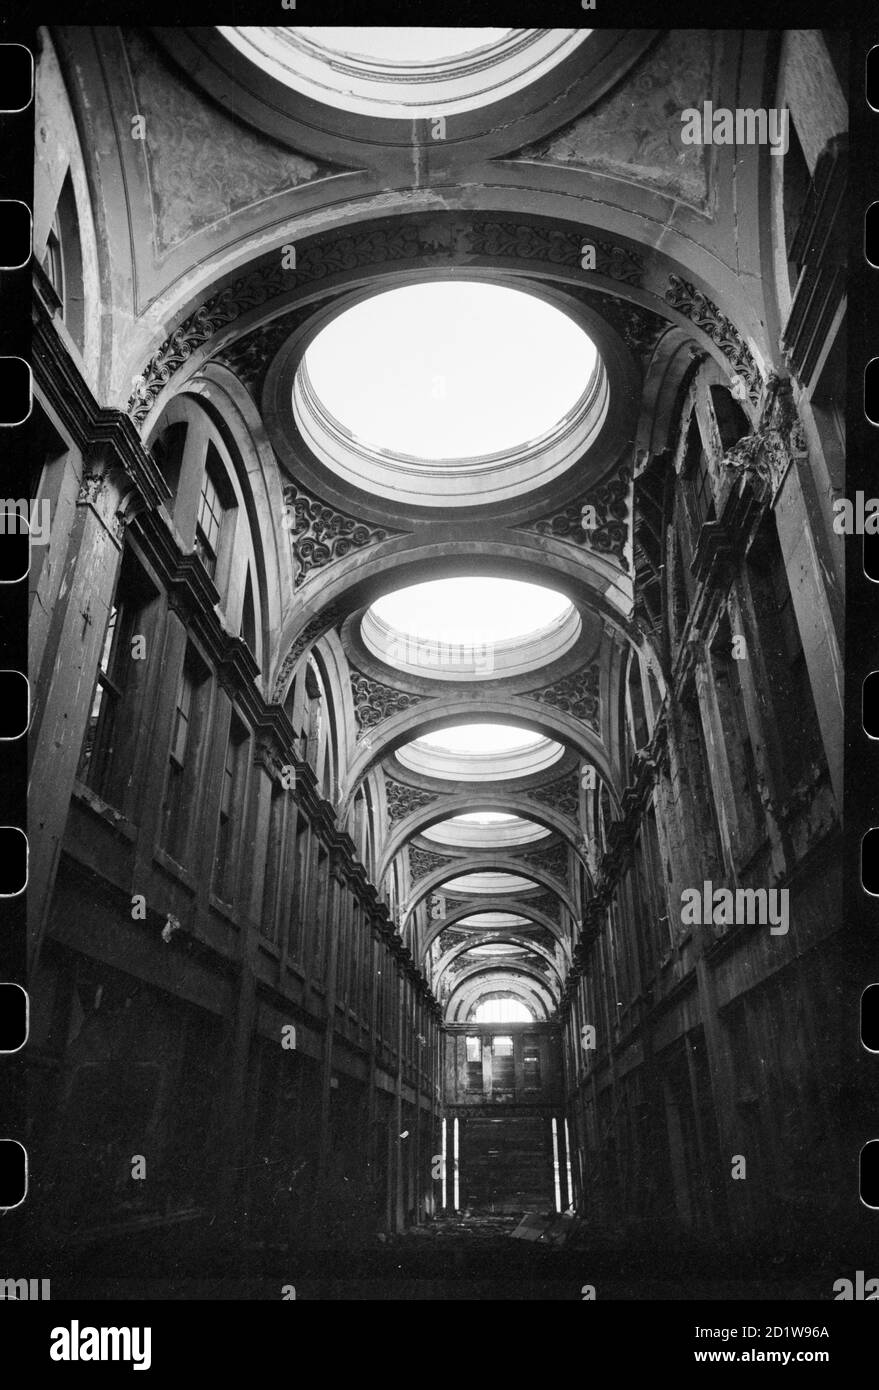 Interior view of the Royal Arcade, built for Richard Grainger and demolished c1963-1964, showing some of the demolition in the central hall, with round roof-lights overhead, and arcades of segmental arches on either side and rubble on the ground, circa 1963 - circa 1964. Stock Photo